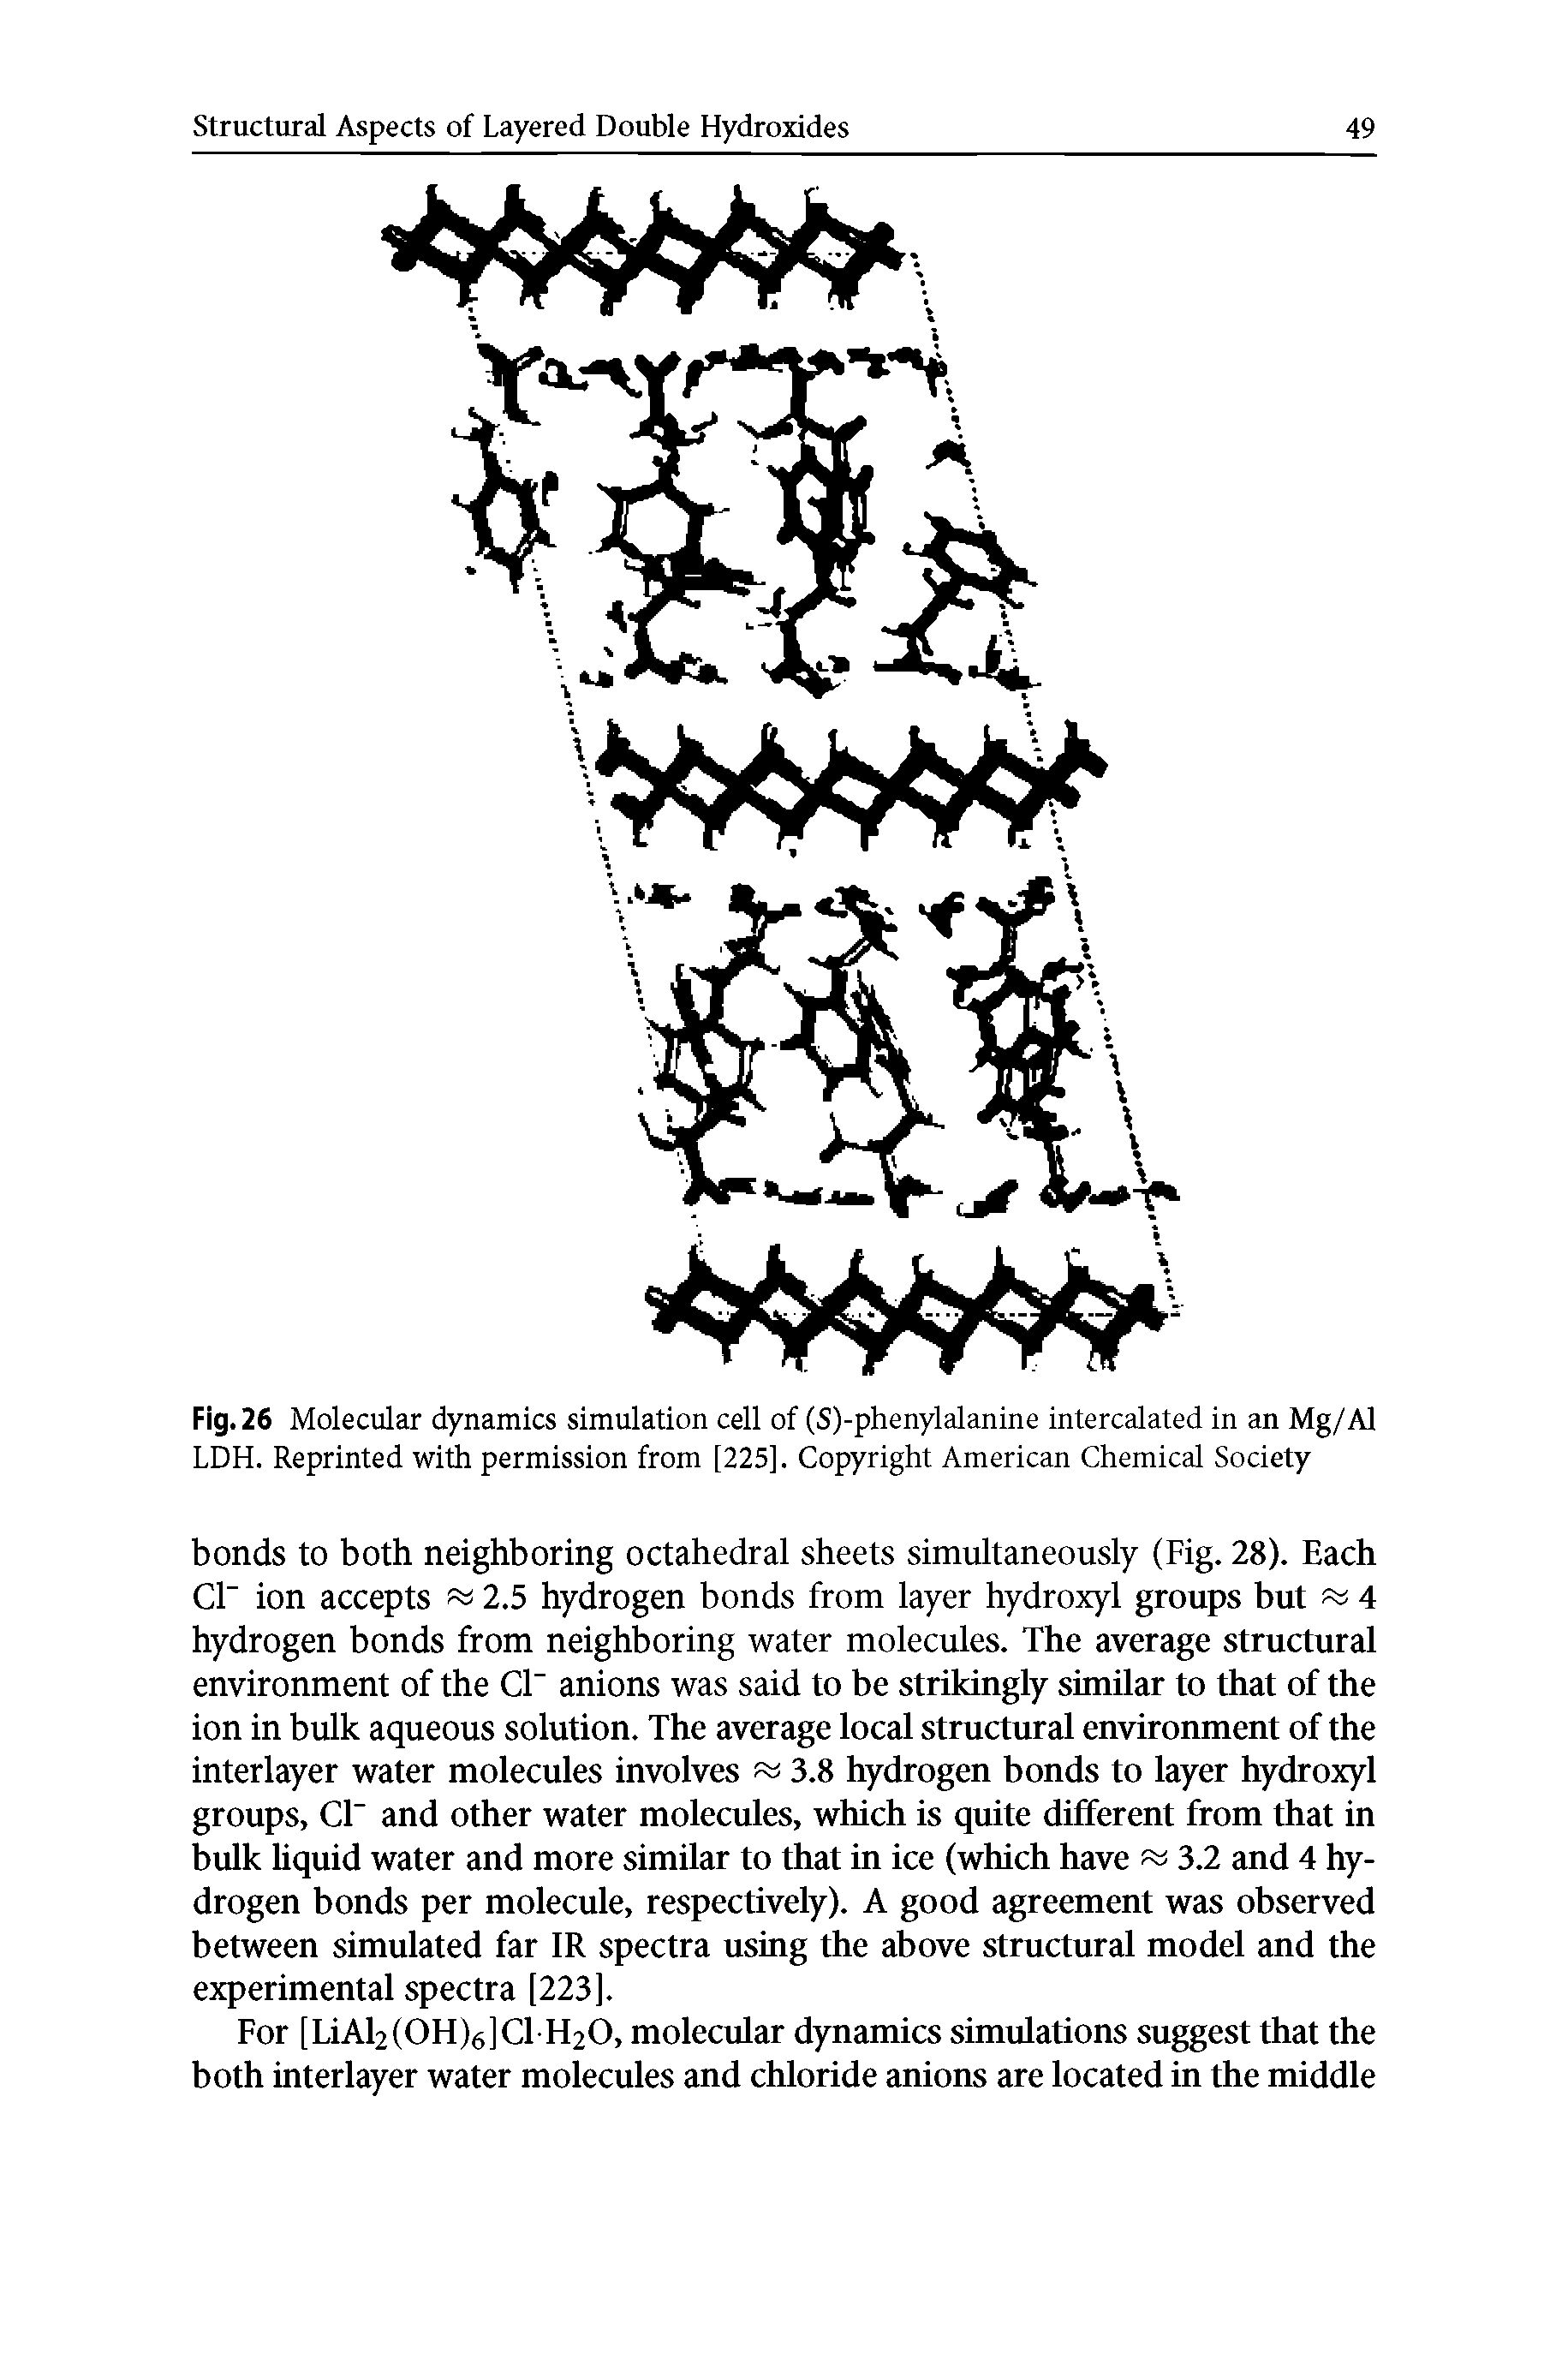 Fig. 26 Molecular dynamics simulation cell of (S)-phenylalanine intercalated in an Mg/Al LDH. Reprinted with permission from [225]. Copyright American Chemical Society...